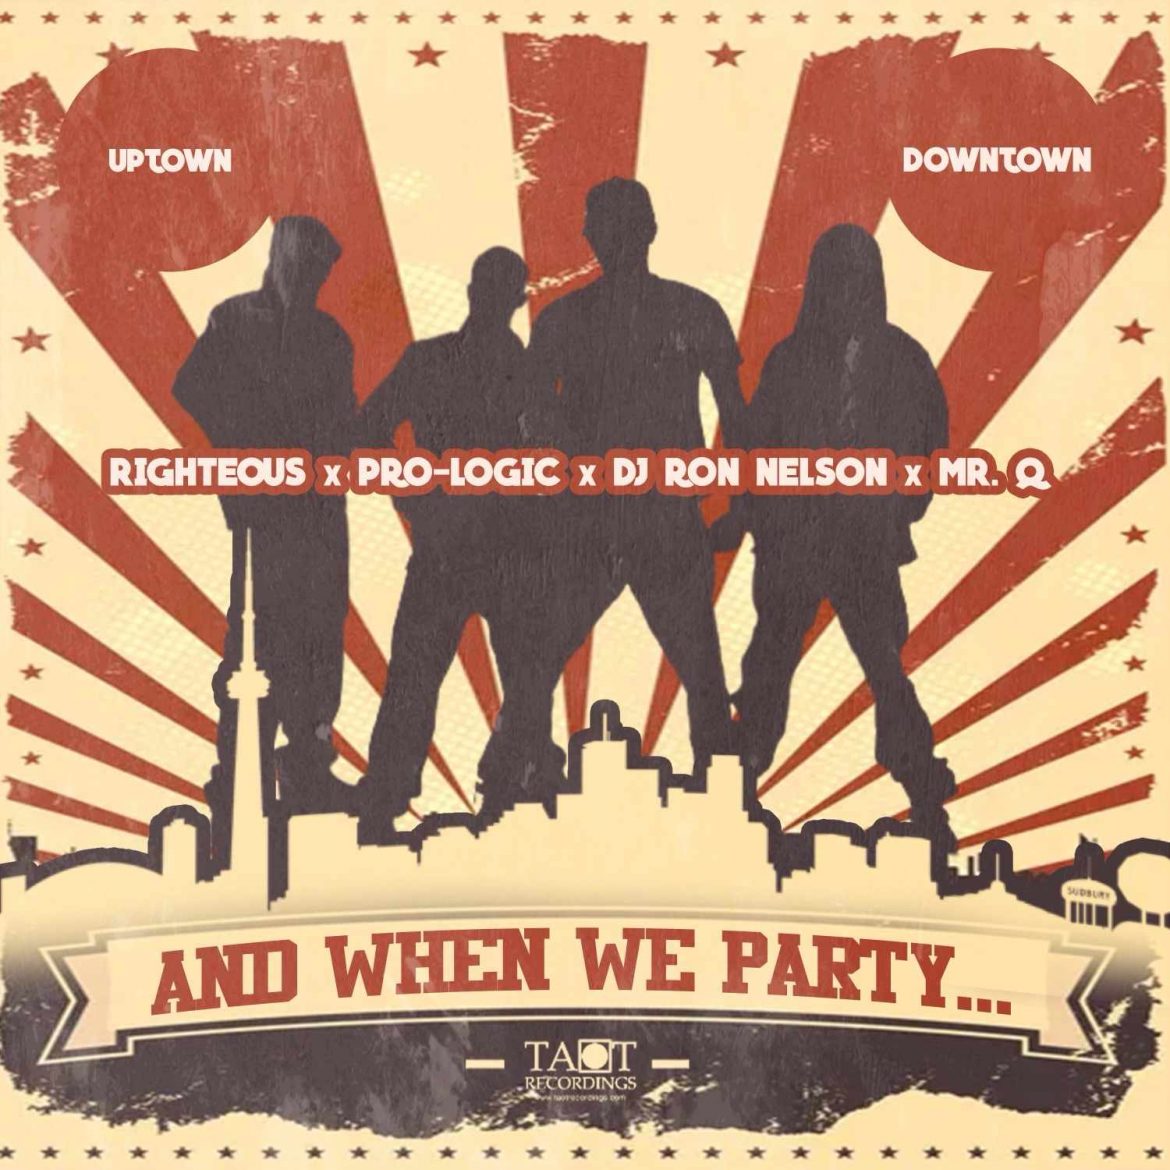 DJ Ron Nelson & Mr. Q Drop Funky Club Banger ‘And When We Party’ to Celebrate 50 Years of Hip Hop